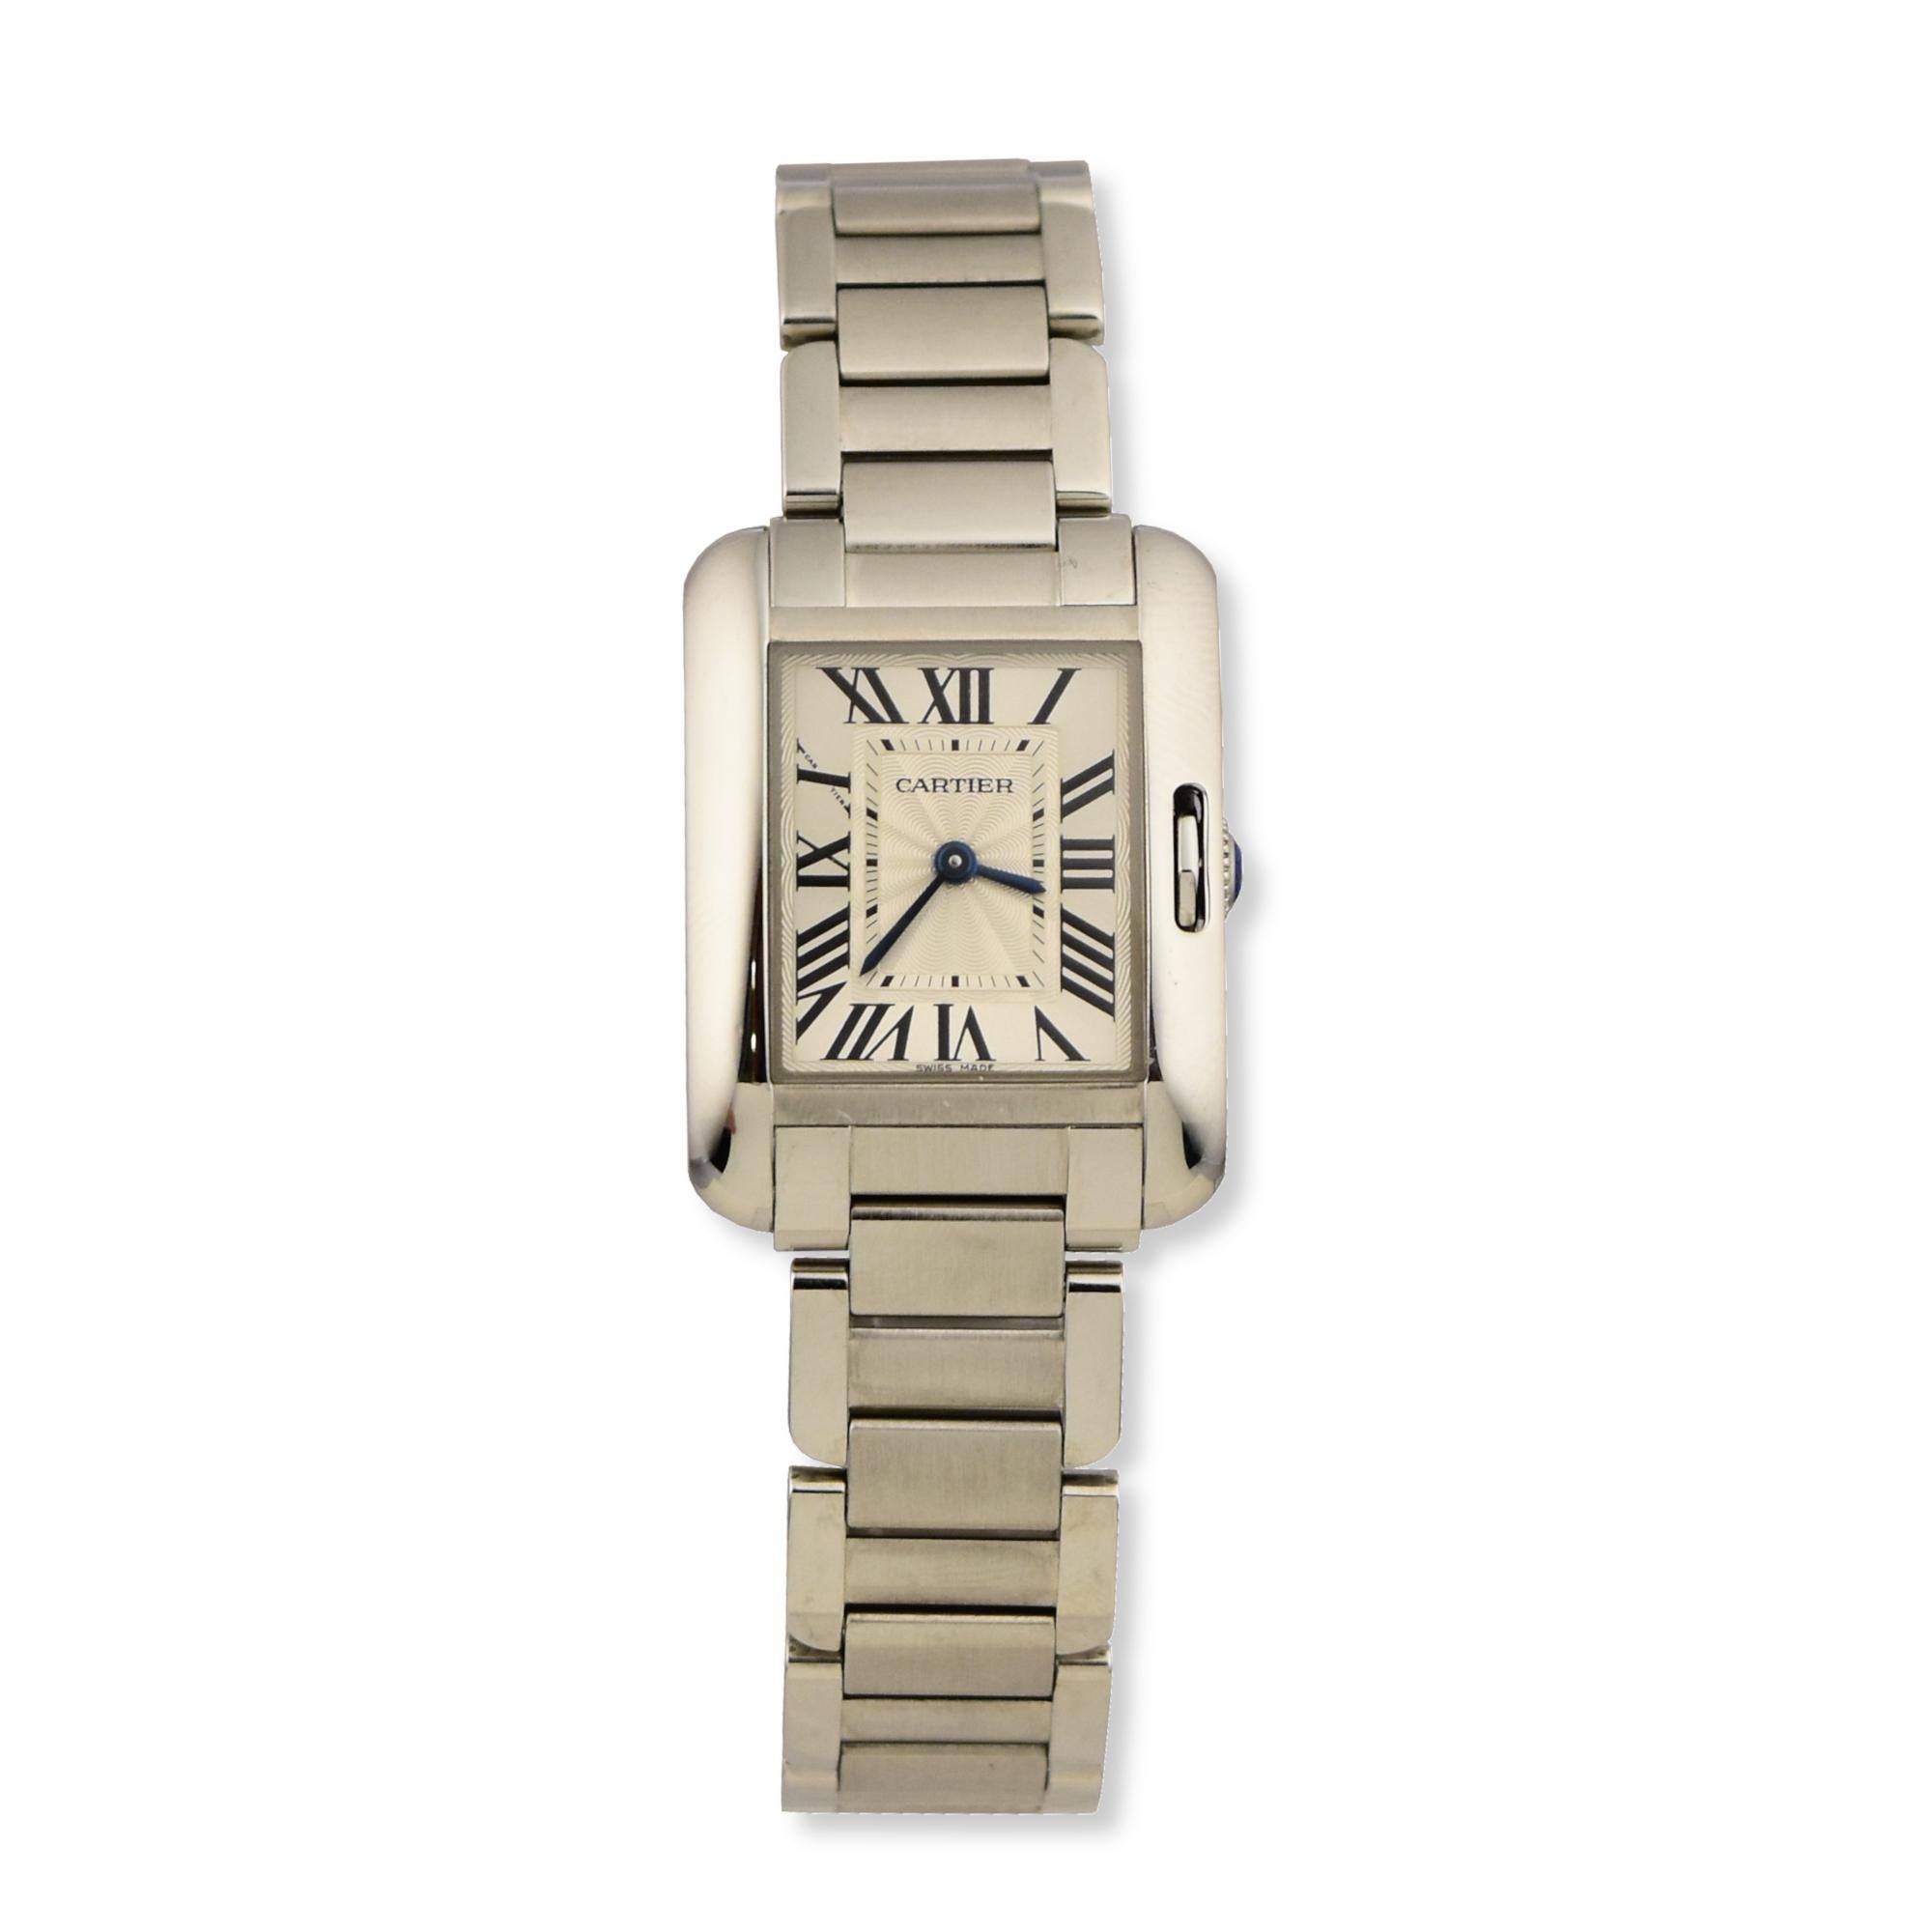 Brand: Cartier
Model: Tank Anglaise 
Movement: Automatic 
Case Size: 26 mm
Dial: Silver 
Case Material: Stainless Steel 
Bracelet Material: Stainless Steel  
Crystal: Scratch-Resistant Sapphire Glass
Includes: 24 Month Brilliance Jewels Warranty
   